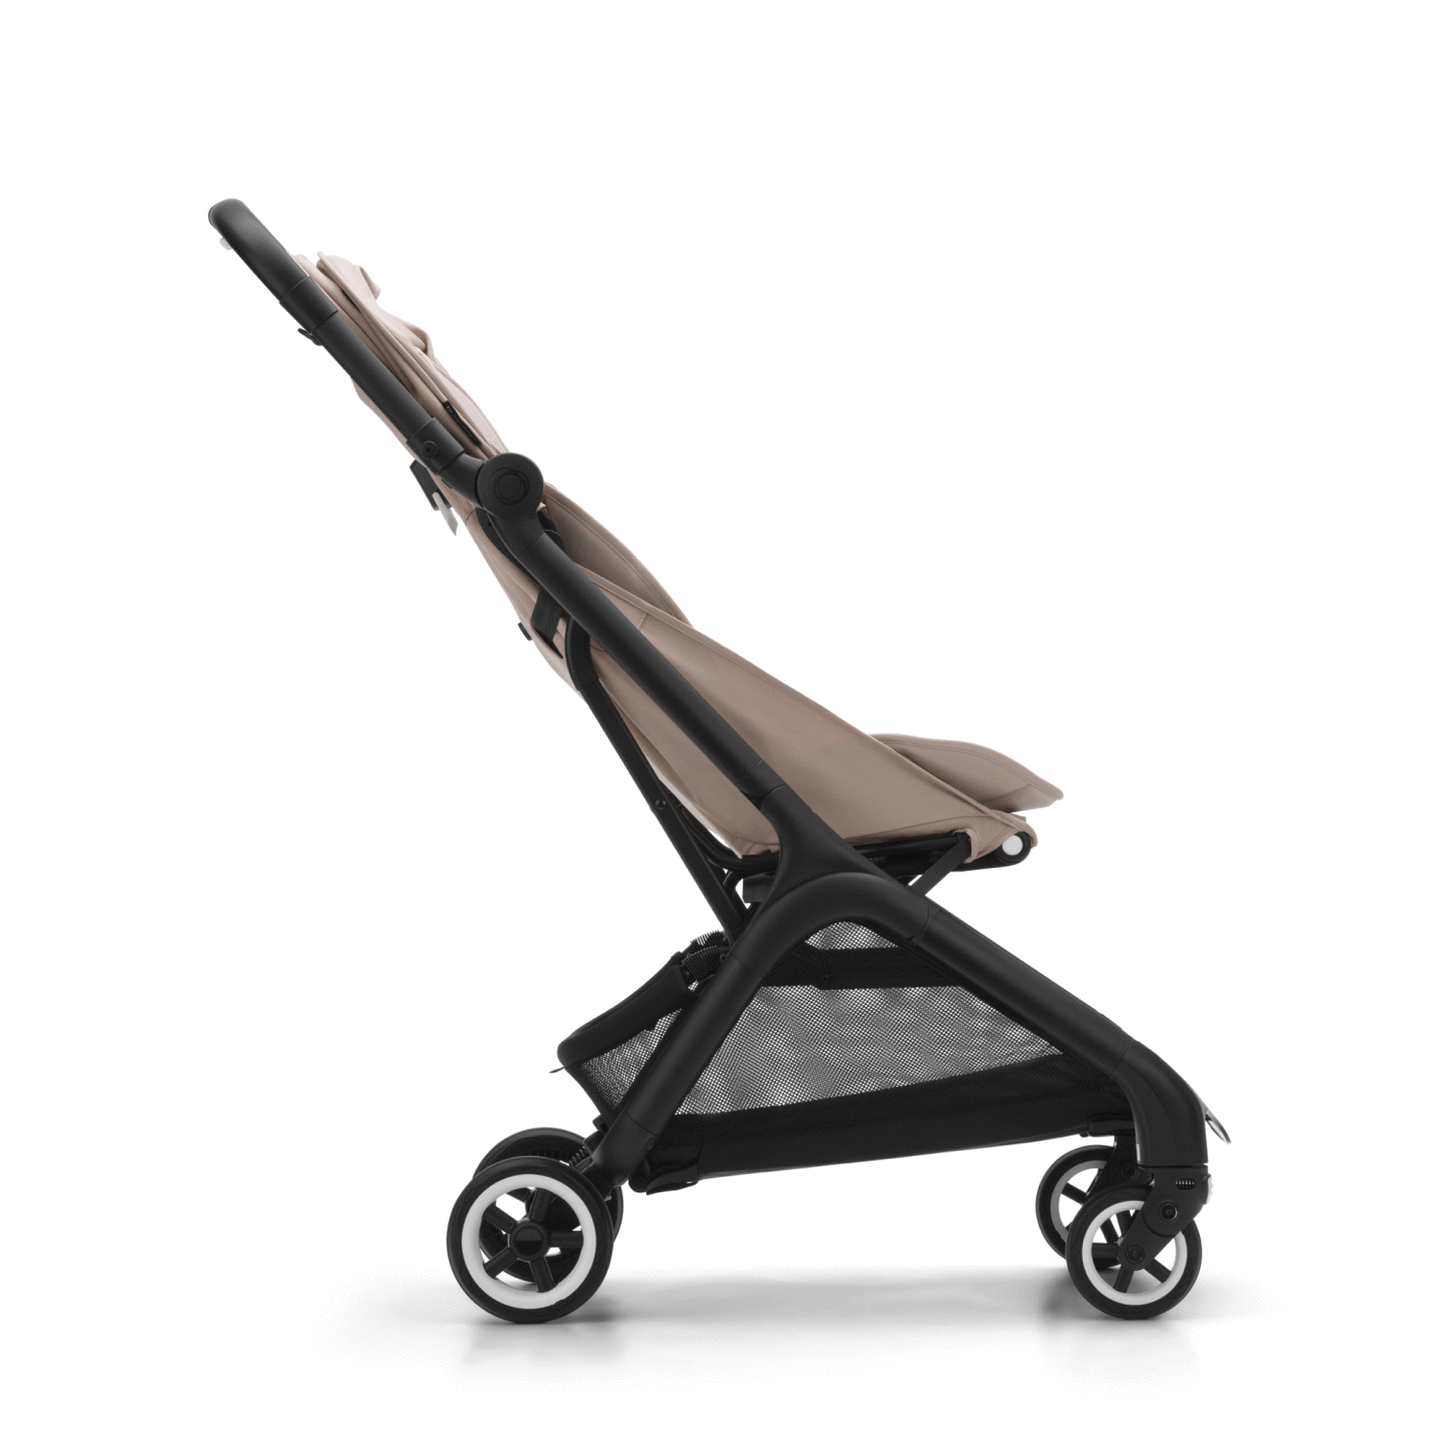 A sequence of images showing the Bugaboo Butterfly pushchair in motion as it folds down into an ultra-compact package.